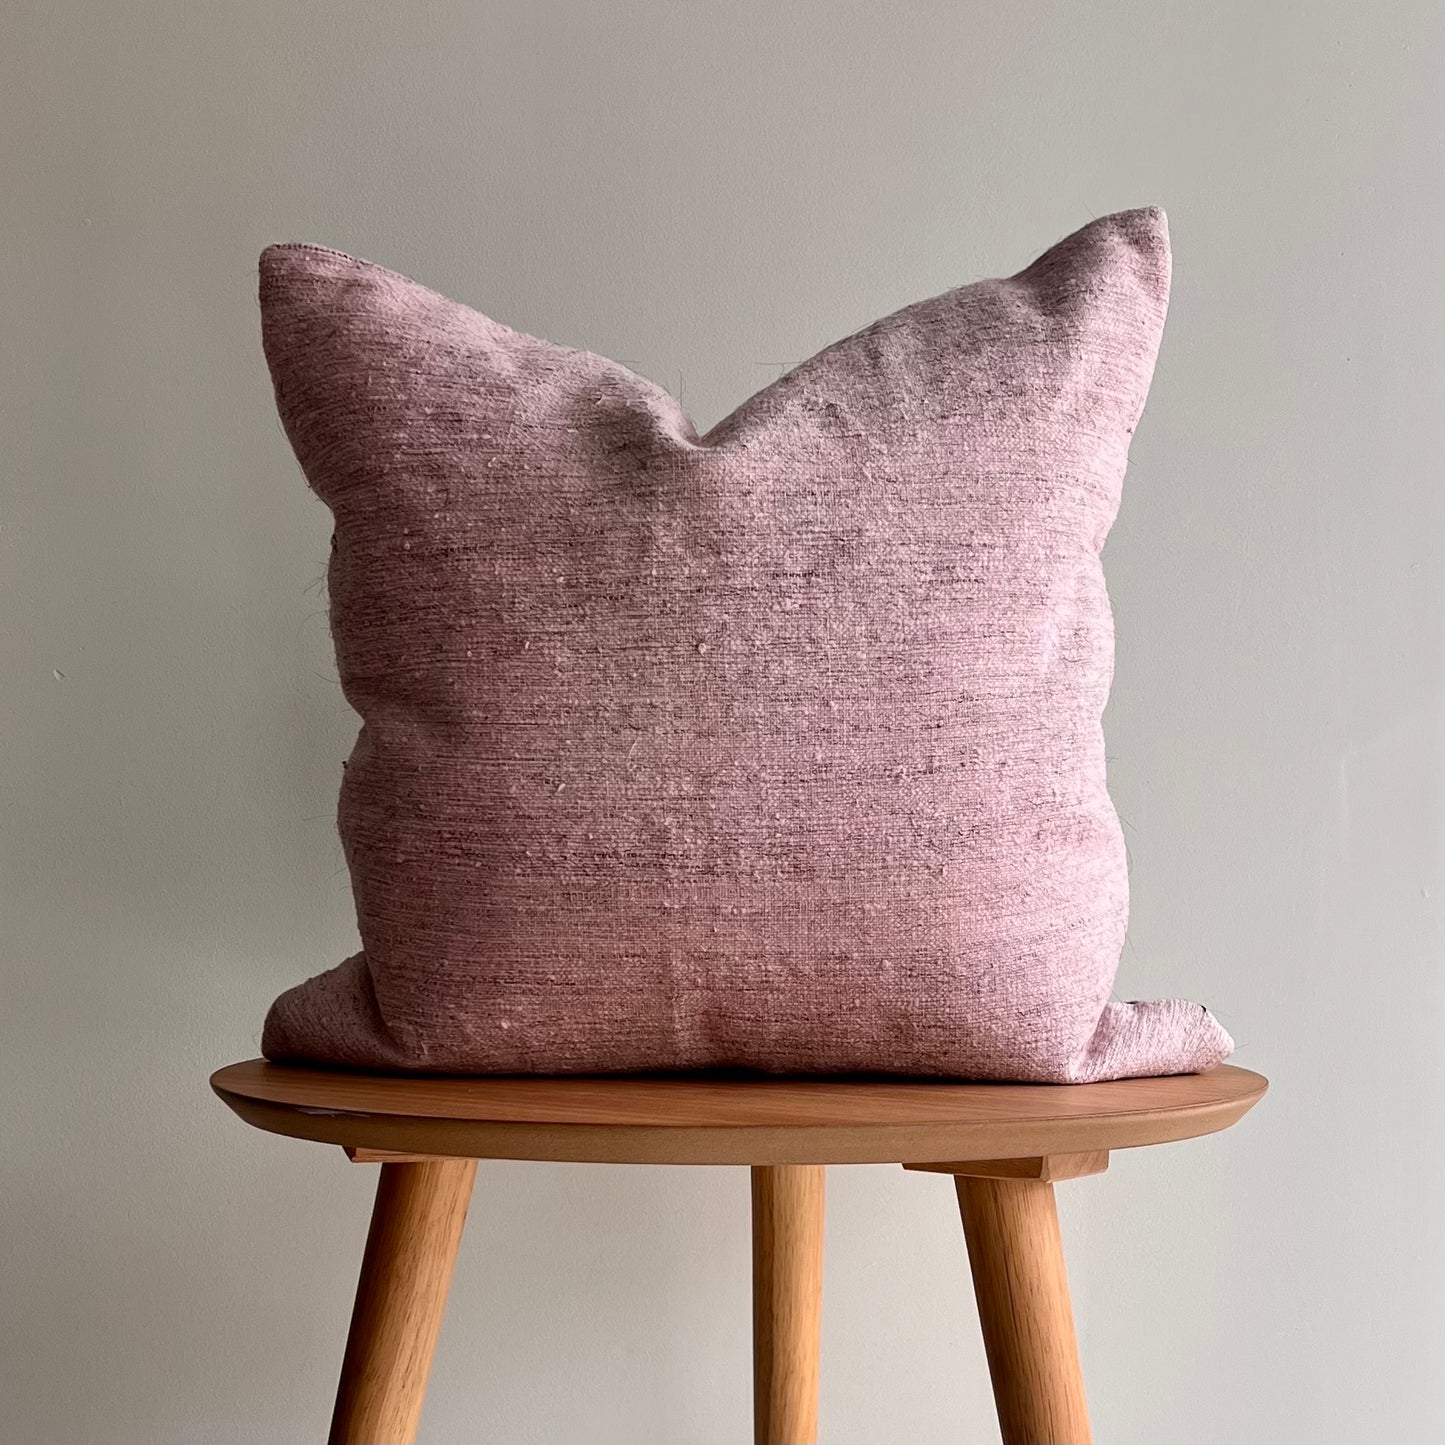 Reclaimed Vintage Pillow PVE0005